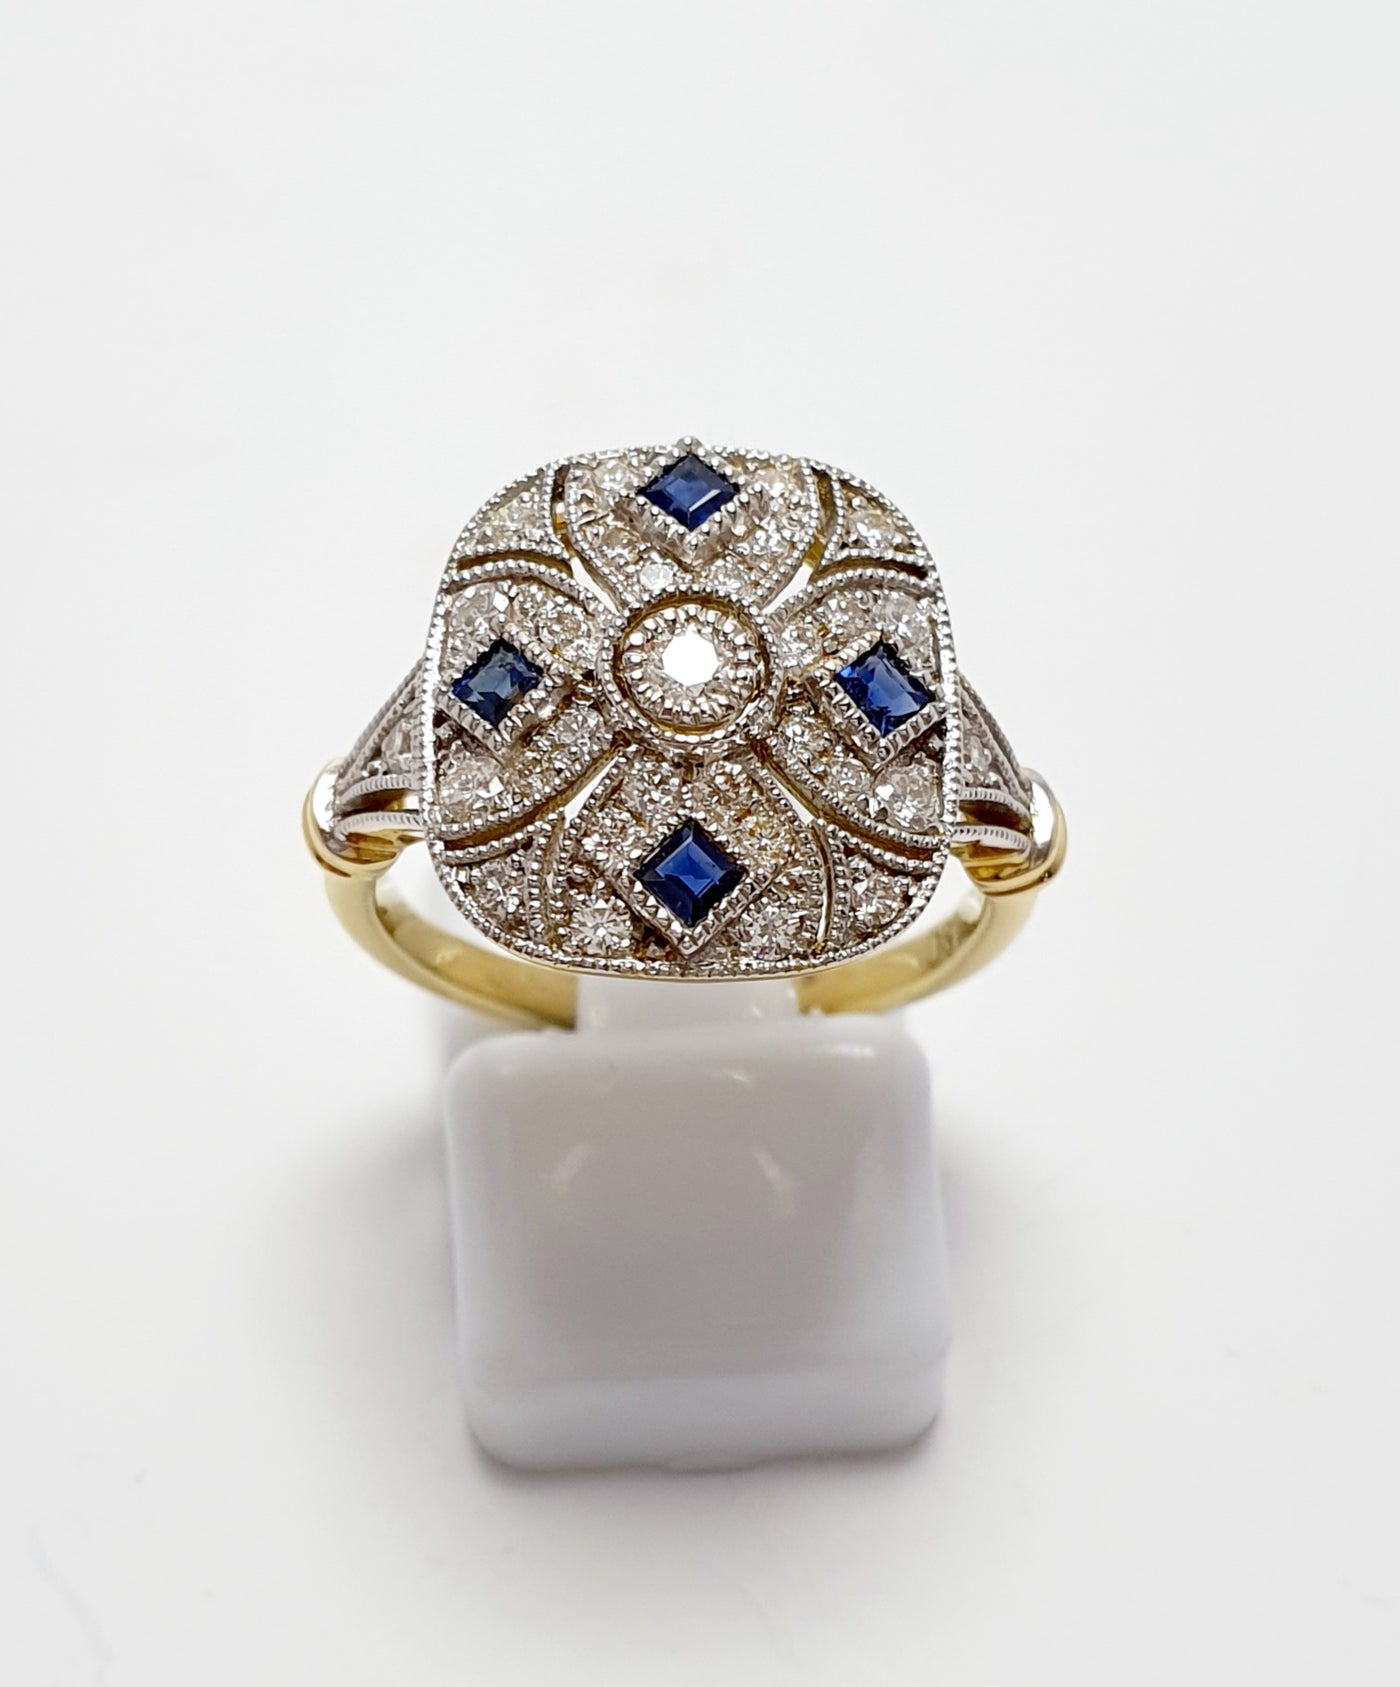 18Ct Yellow Gold And White Gold Art Deco Style Ring Set With Sapphires 0.30Ct And Diamonds 0.36Ct